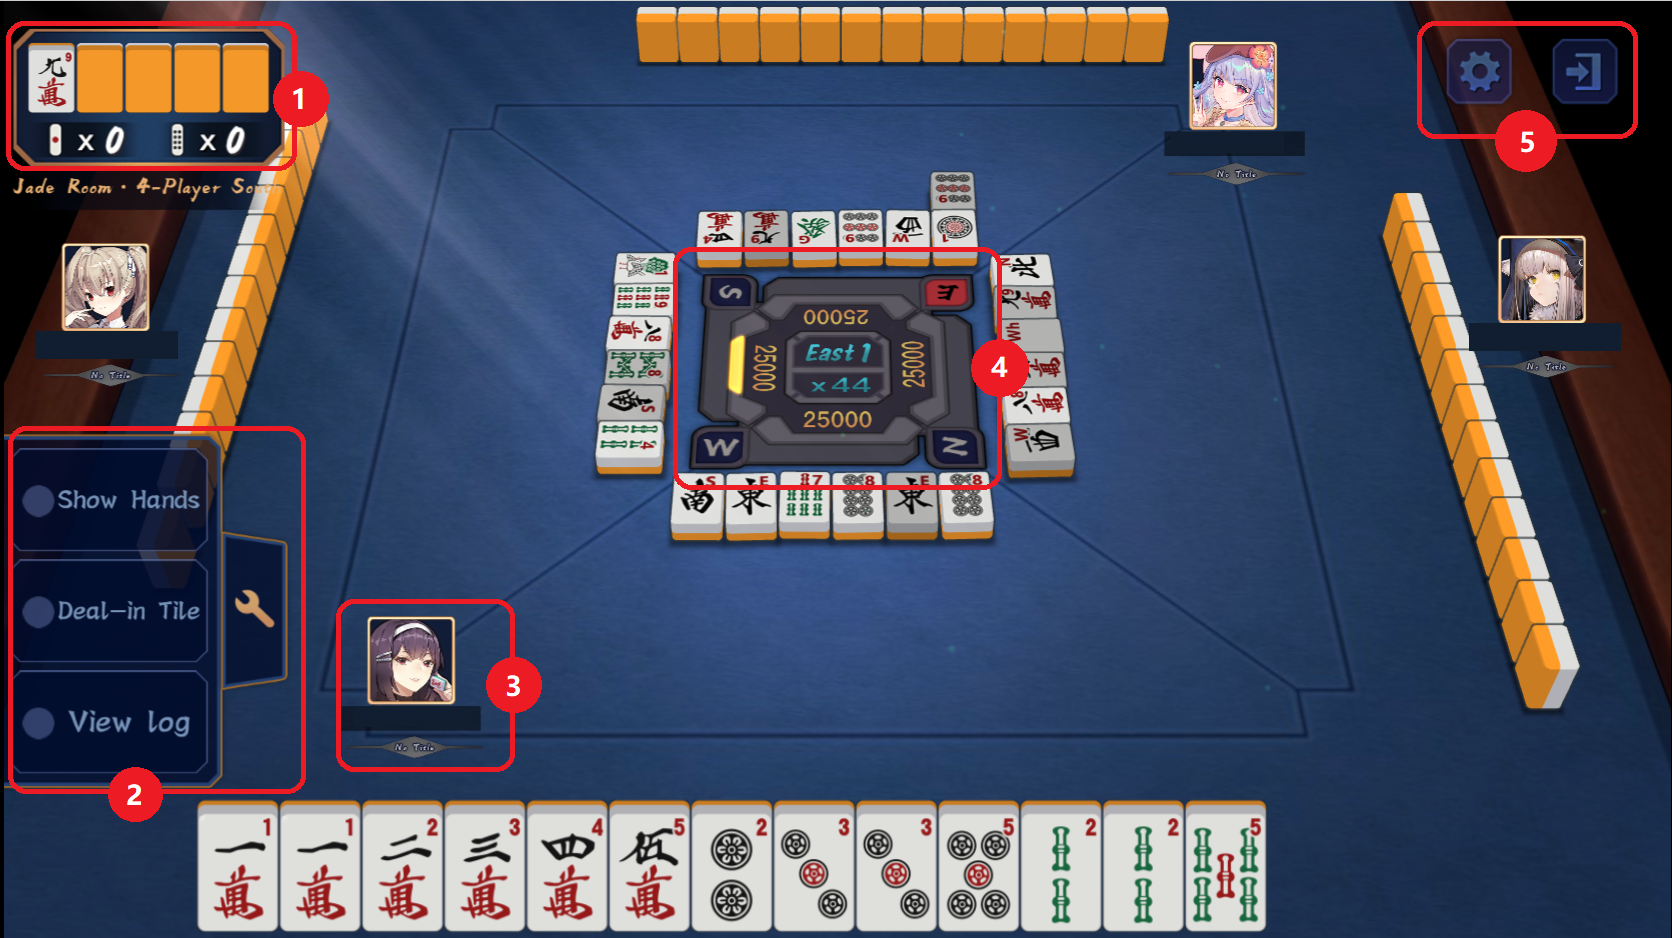 Way to play mahjong online with friends? : r/Mahjong